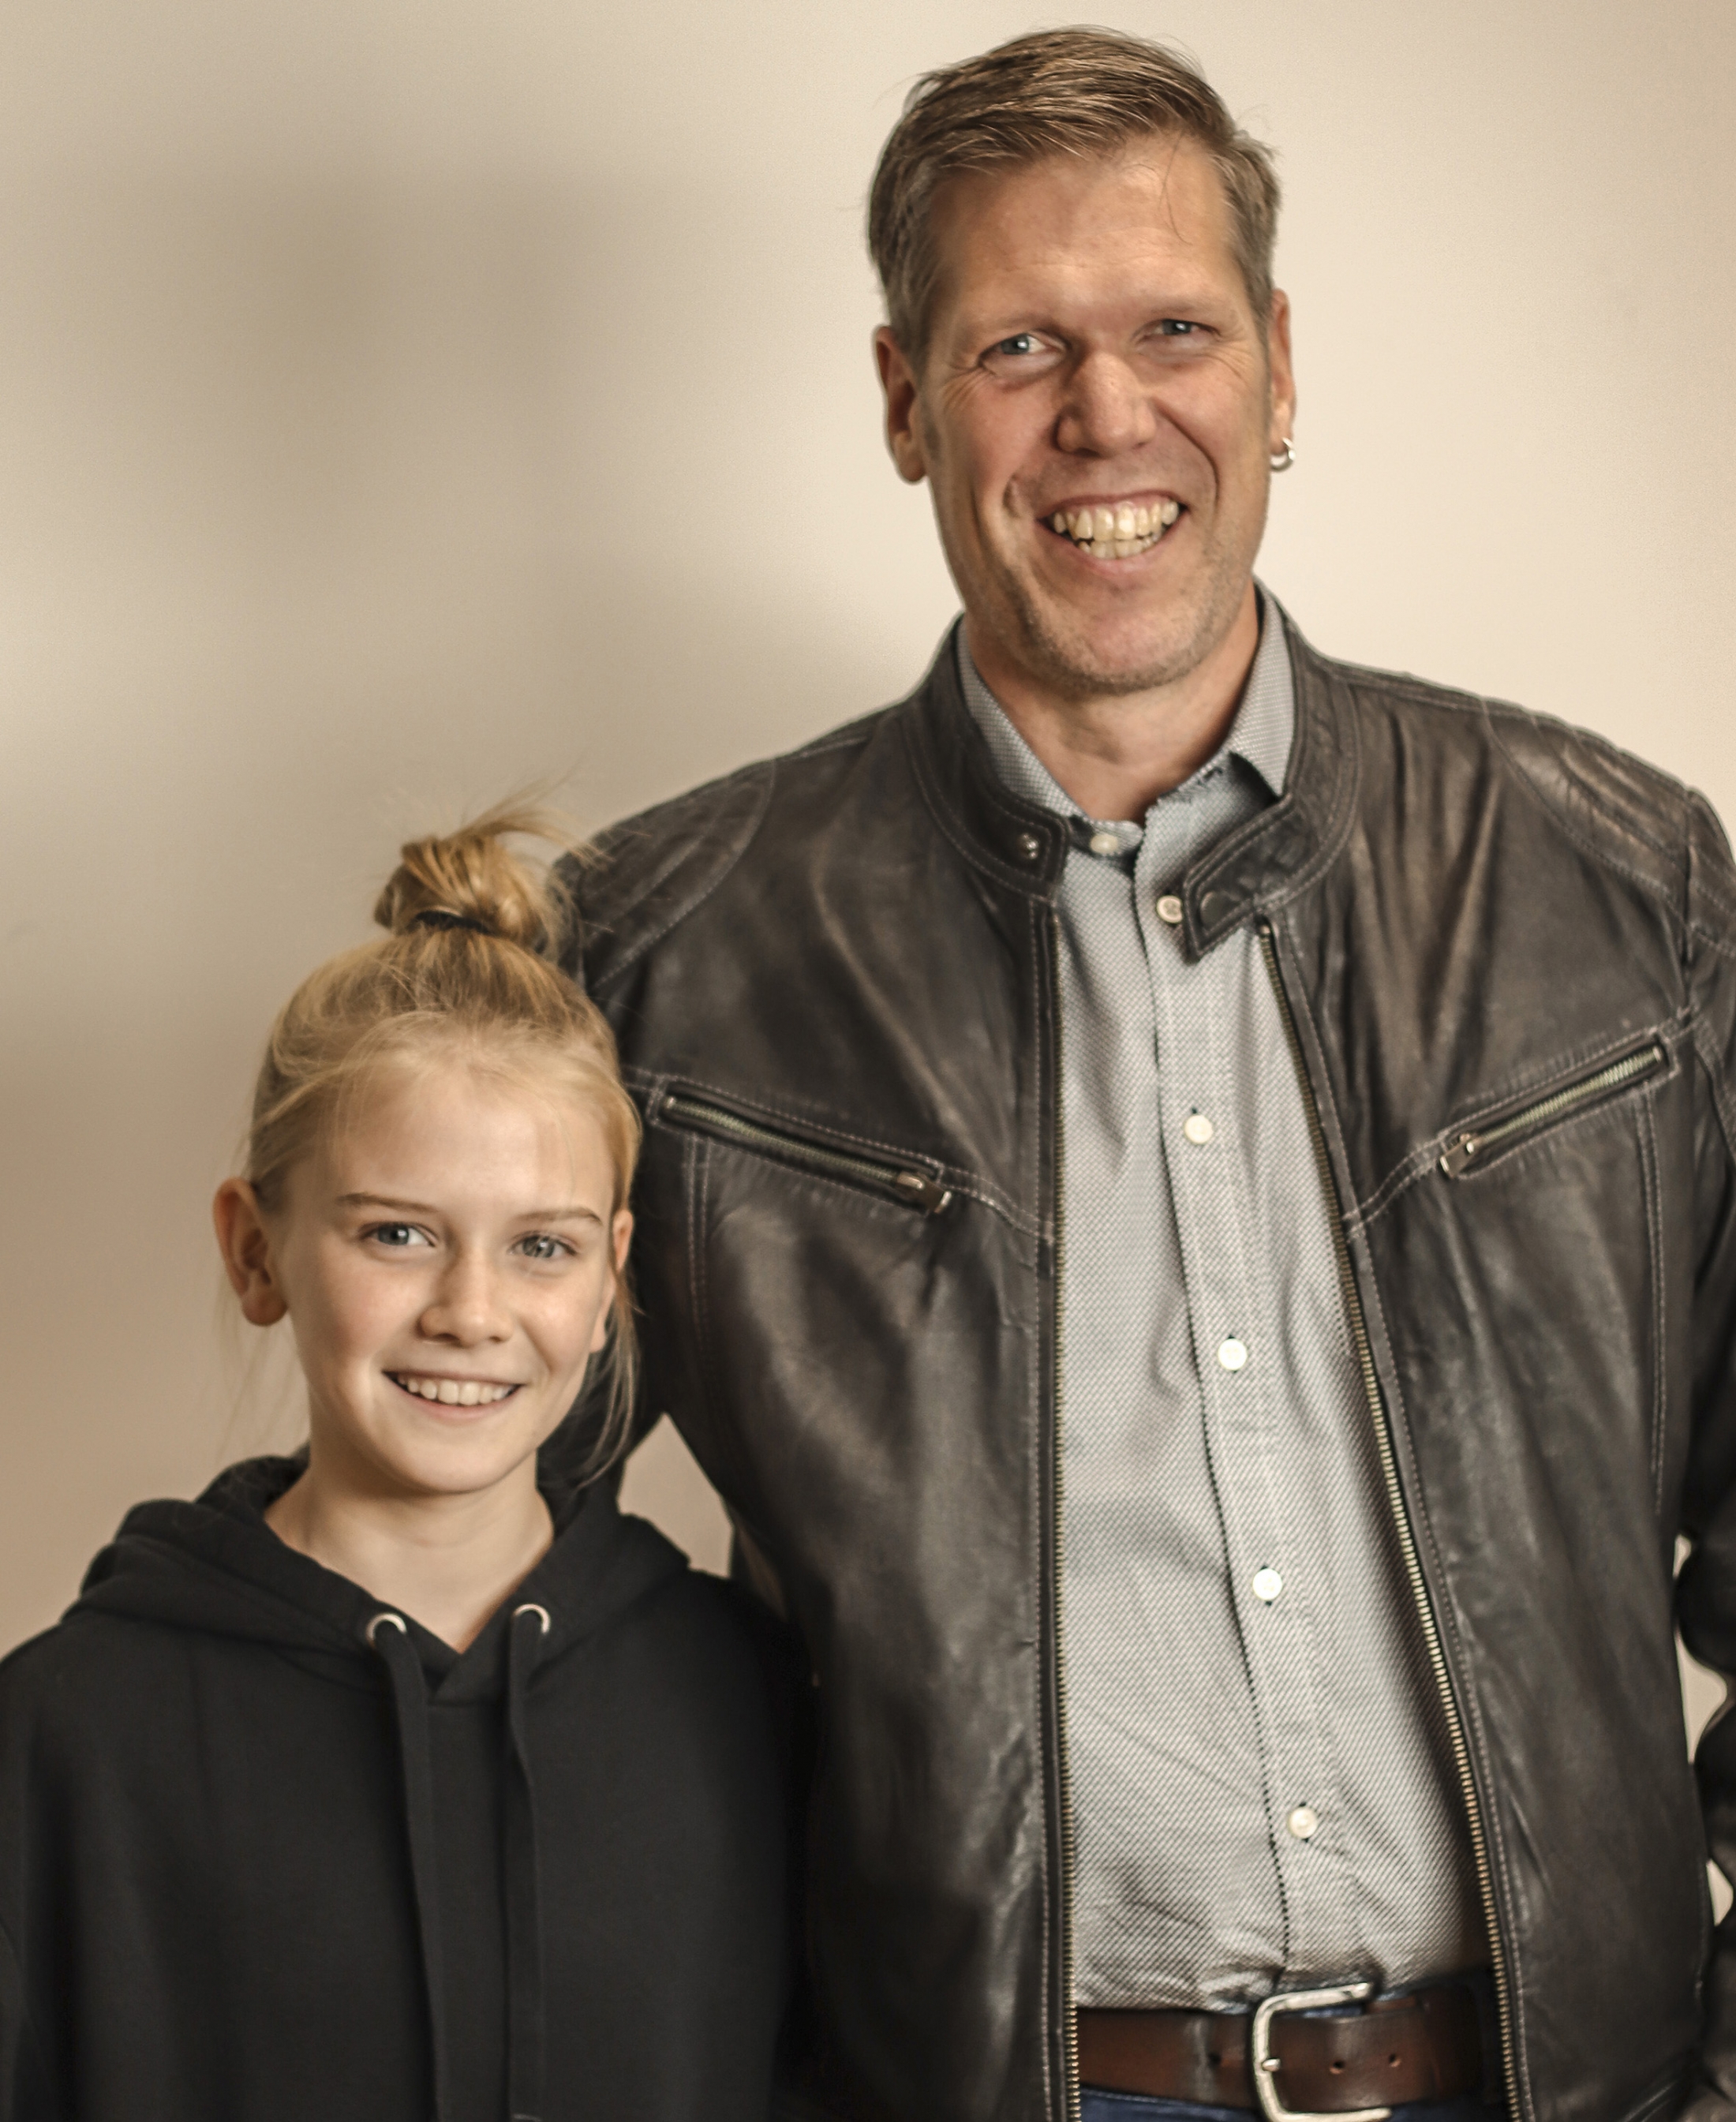 CIM GmbH is giving its support to the charity run organised by Maisach’s secondary school. In the illustration: CIM’s Markus Schwarz with his daughter Julia.